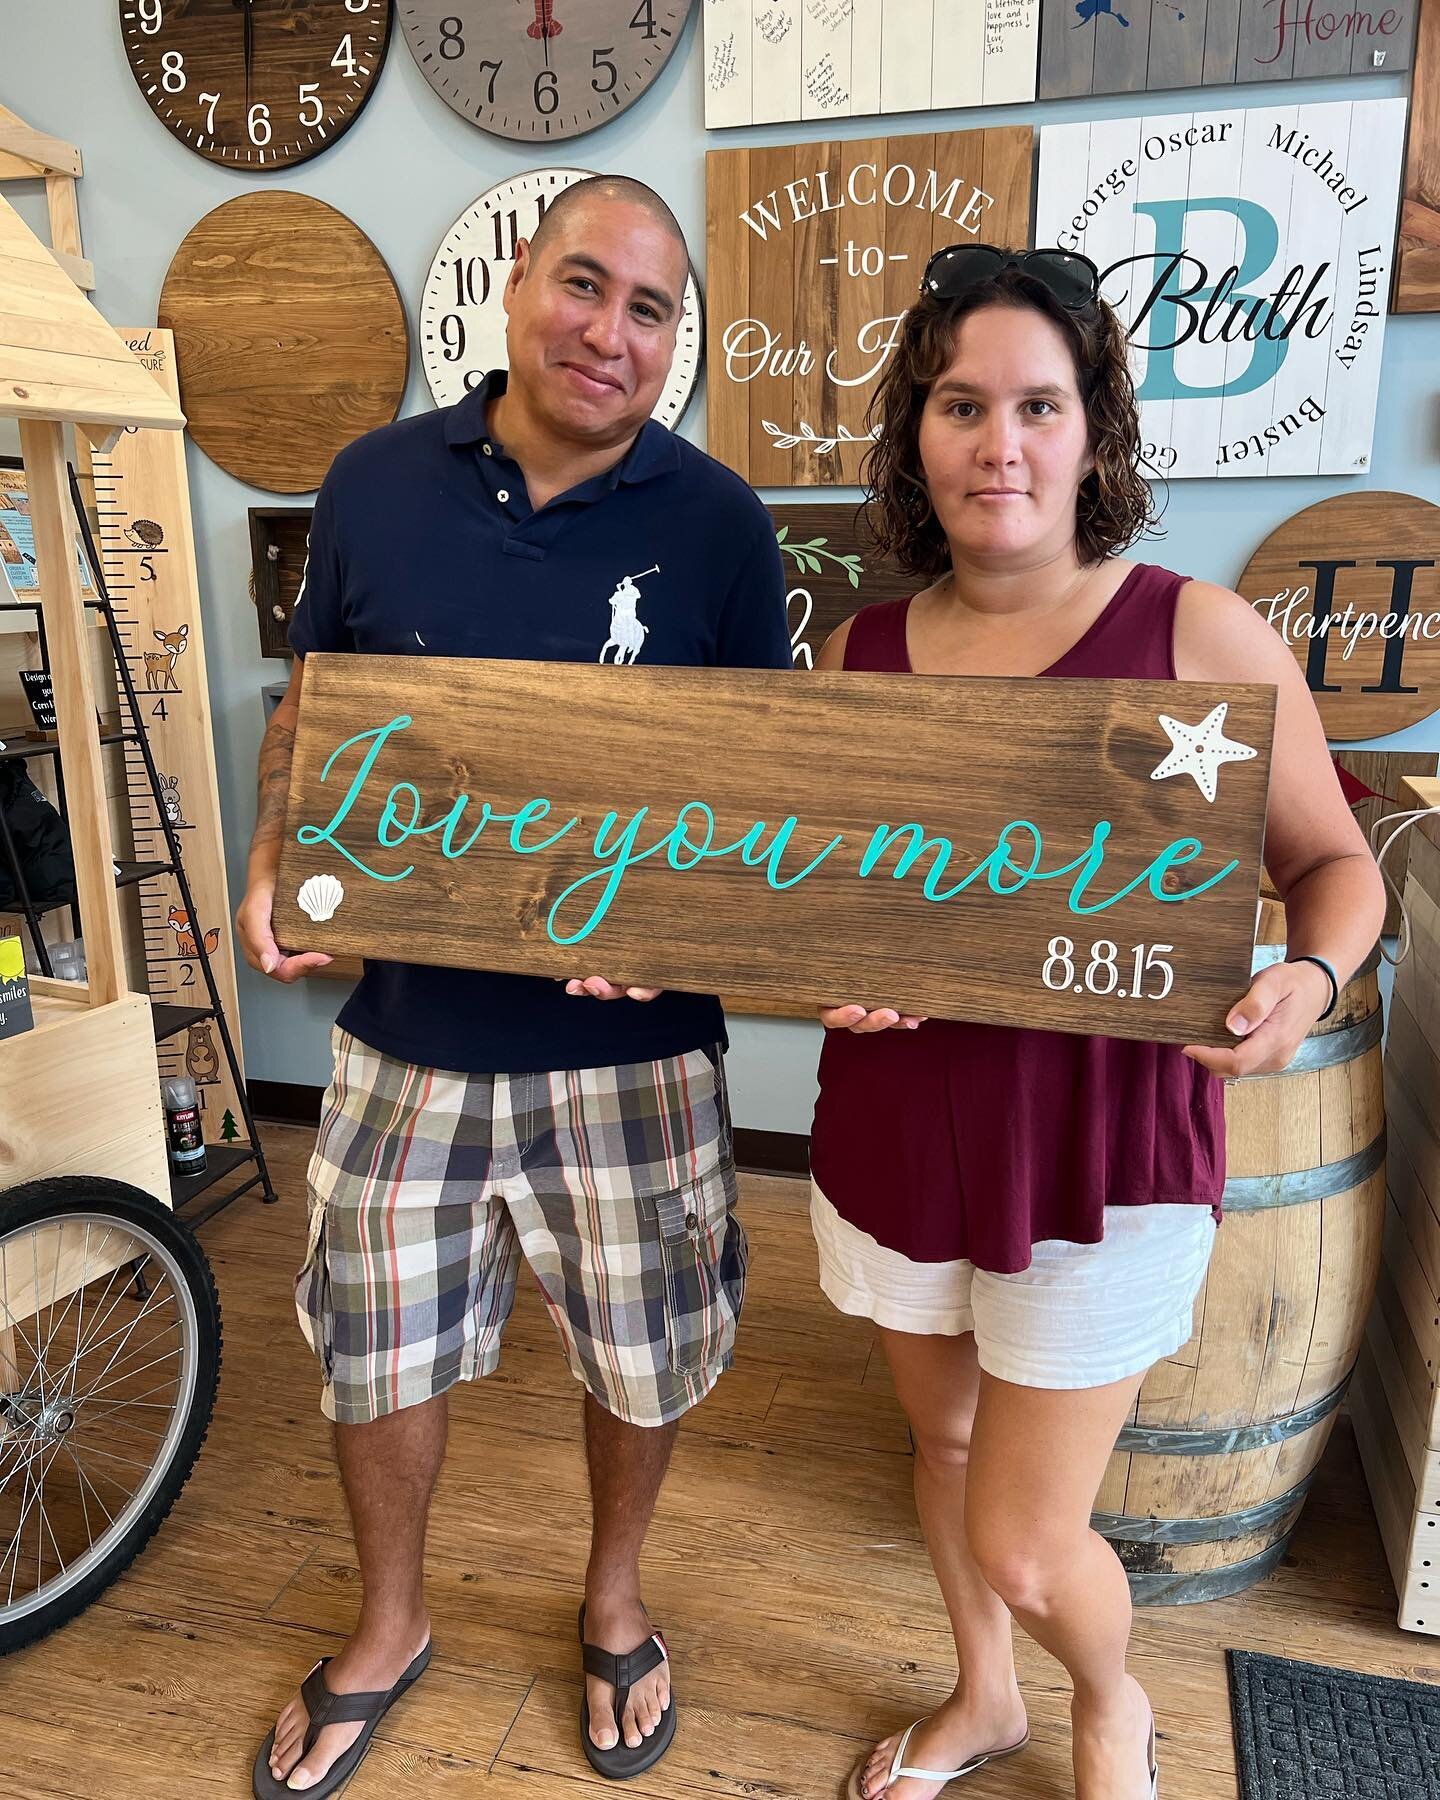 We love this gorgeous anniversary sign! Thank you all! 🐚

Plan your next date at Words on Wood! Workshop dates and sign ups are available at wordsonwood.com 

-
-
-
#wordsonwood #wordsonwoodus #wordsonwoodct #wordsonwoodparty #thingstodoinconnecticu